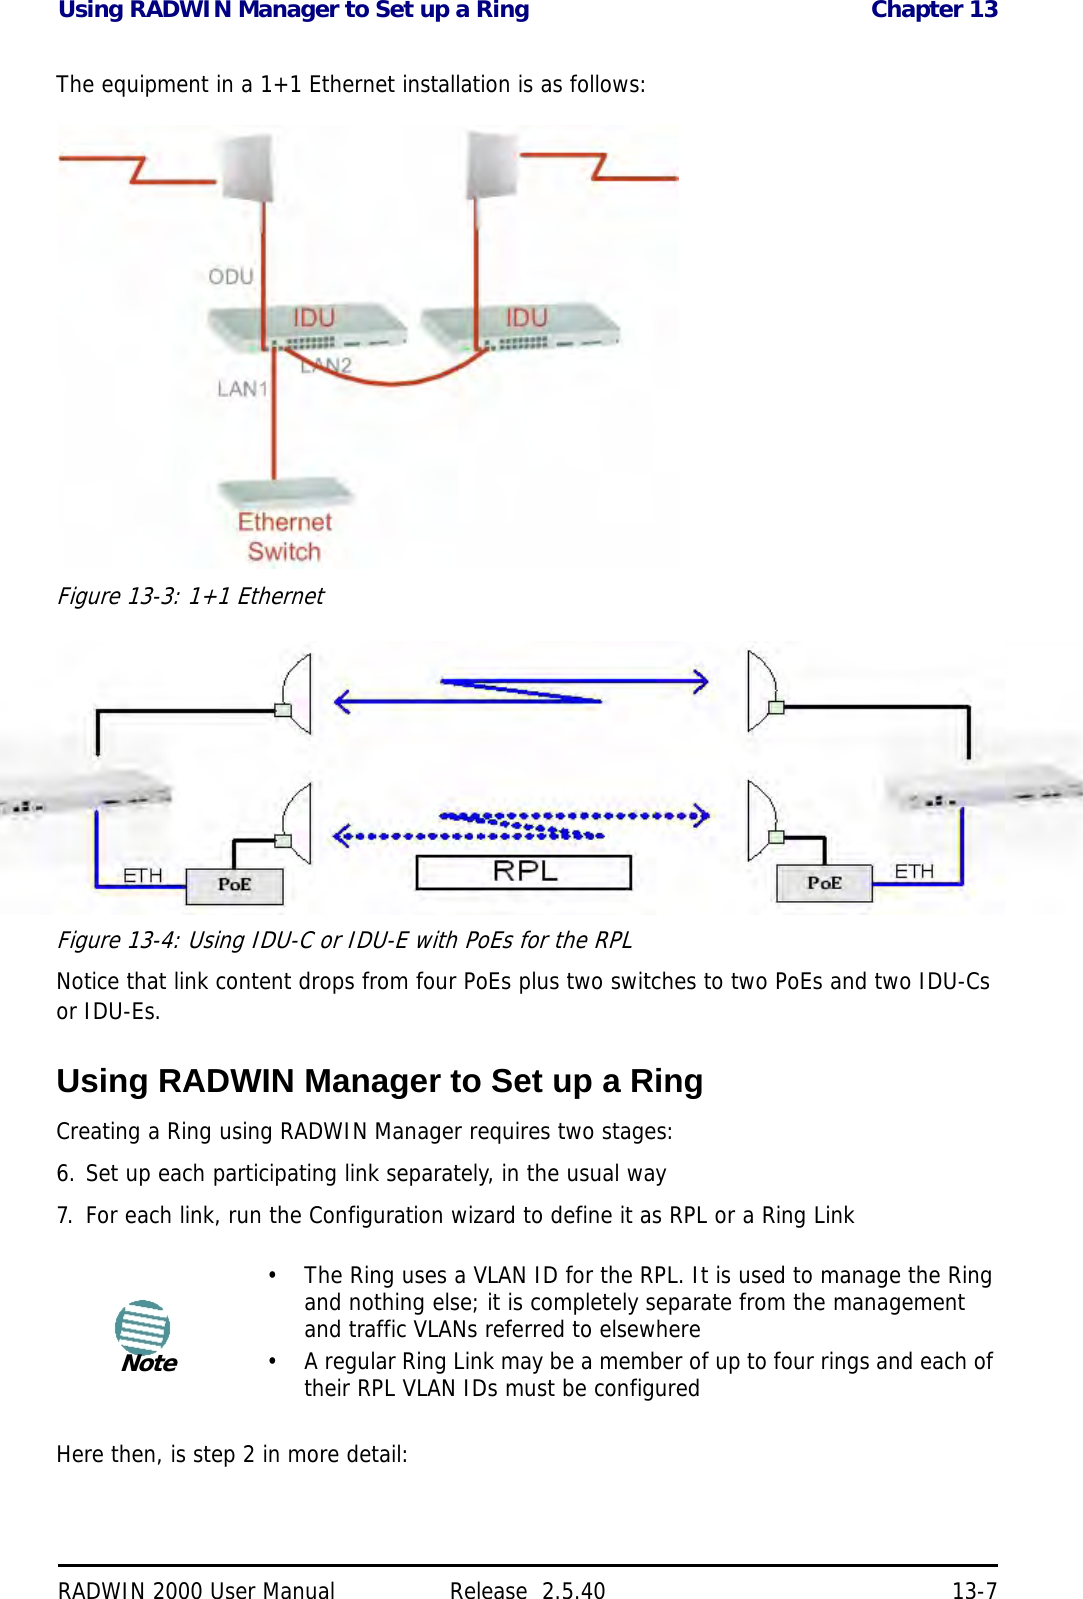 Using RADWIN Manager to Set up a Ring Chapter 13RADWIN 2000 User Manual Release  2.5.40 13-7The equipment in a 1+1 Ethernet installation is as follows:Figure 13-3: 1+1 EthernetFigure 13-4: Using IDU-C or IDU-E with PoEs for the RPLNotice that link content drops from four PoEs plus two switches to two PoEs and two IDU-Cs or IDU-Es.Using RADWIN Manager to Set up a RingCreating a Ring using RADWIN Manager requires two stages:6. Set up each participating link separately, in the usual way7. For each link, run the Configuration wizard to define it as RPL or a Ring LinkHere then, is step 2 in more detail:Note• The Ring uses a VLAN ID for the RPL. It is used to manage the Ring and nothing else; it is completely separate from the management and traffic VLANs referred to elsewhere• A regular Ring Link may be a member of up to four rings and each of their RPL VLAN IDs must be configured